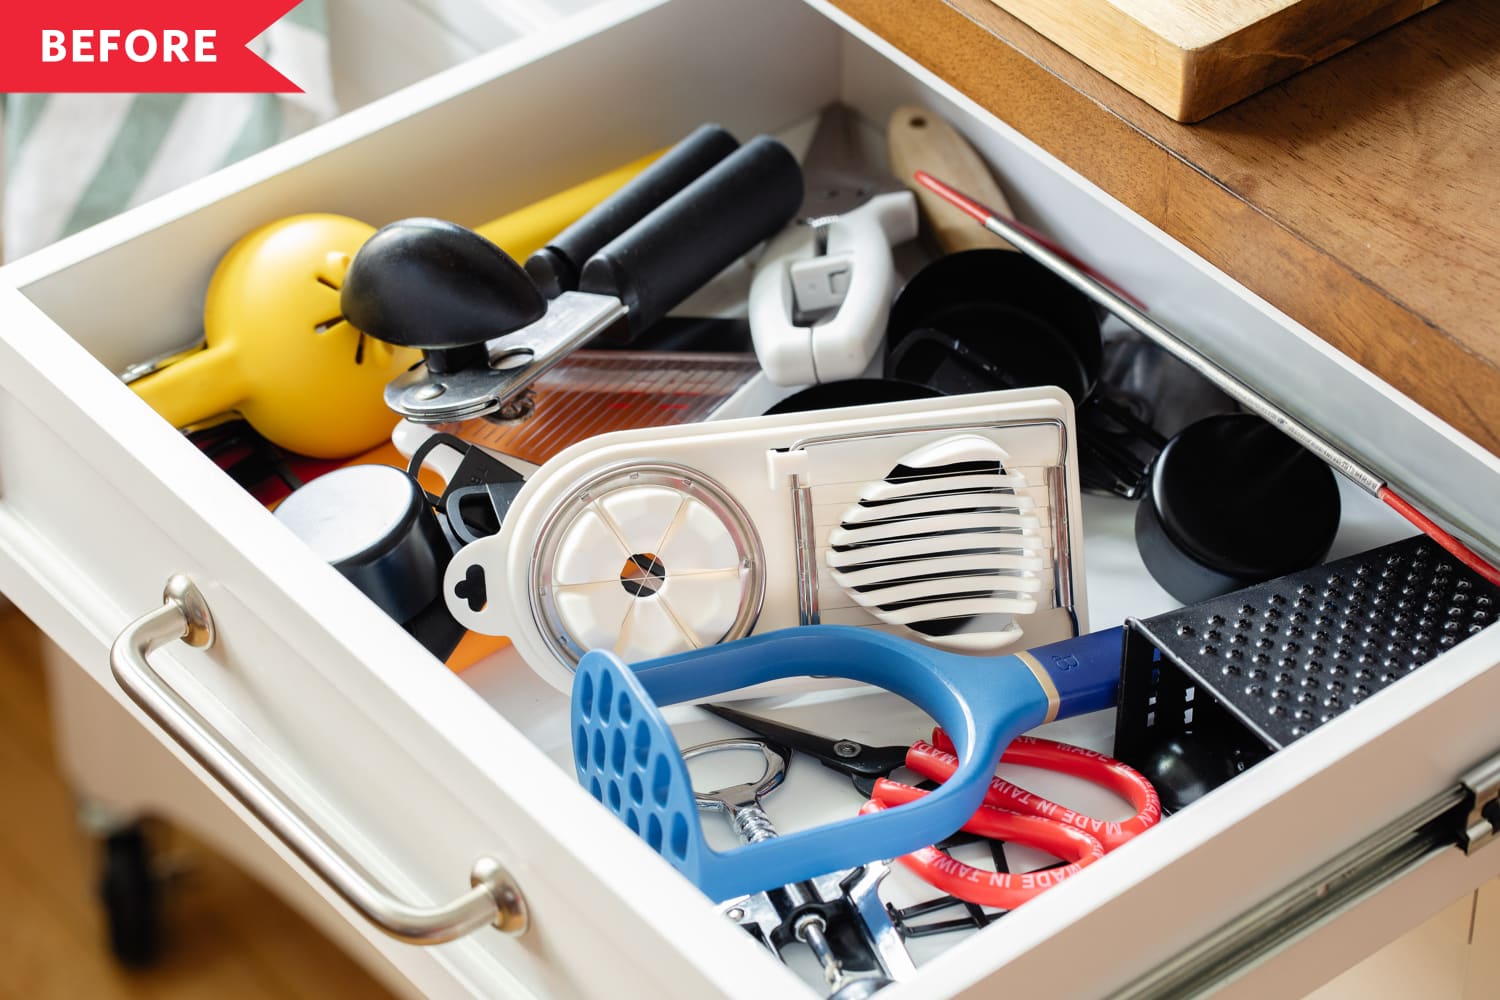 https://cdn.apartmenttherapy.info/image/upload/f_auto,q_auto:eco,c_fill,g_auto,w_1500,ar_3:2/k%2FPhoto%2FLifestyle%2F2021-08-The-Most-Brilliant-Drawer-Organizing-Tip-That-Everyone-Needs-to-Hear%2FMessy-drawer-before